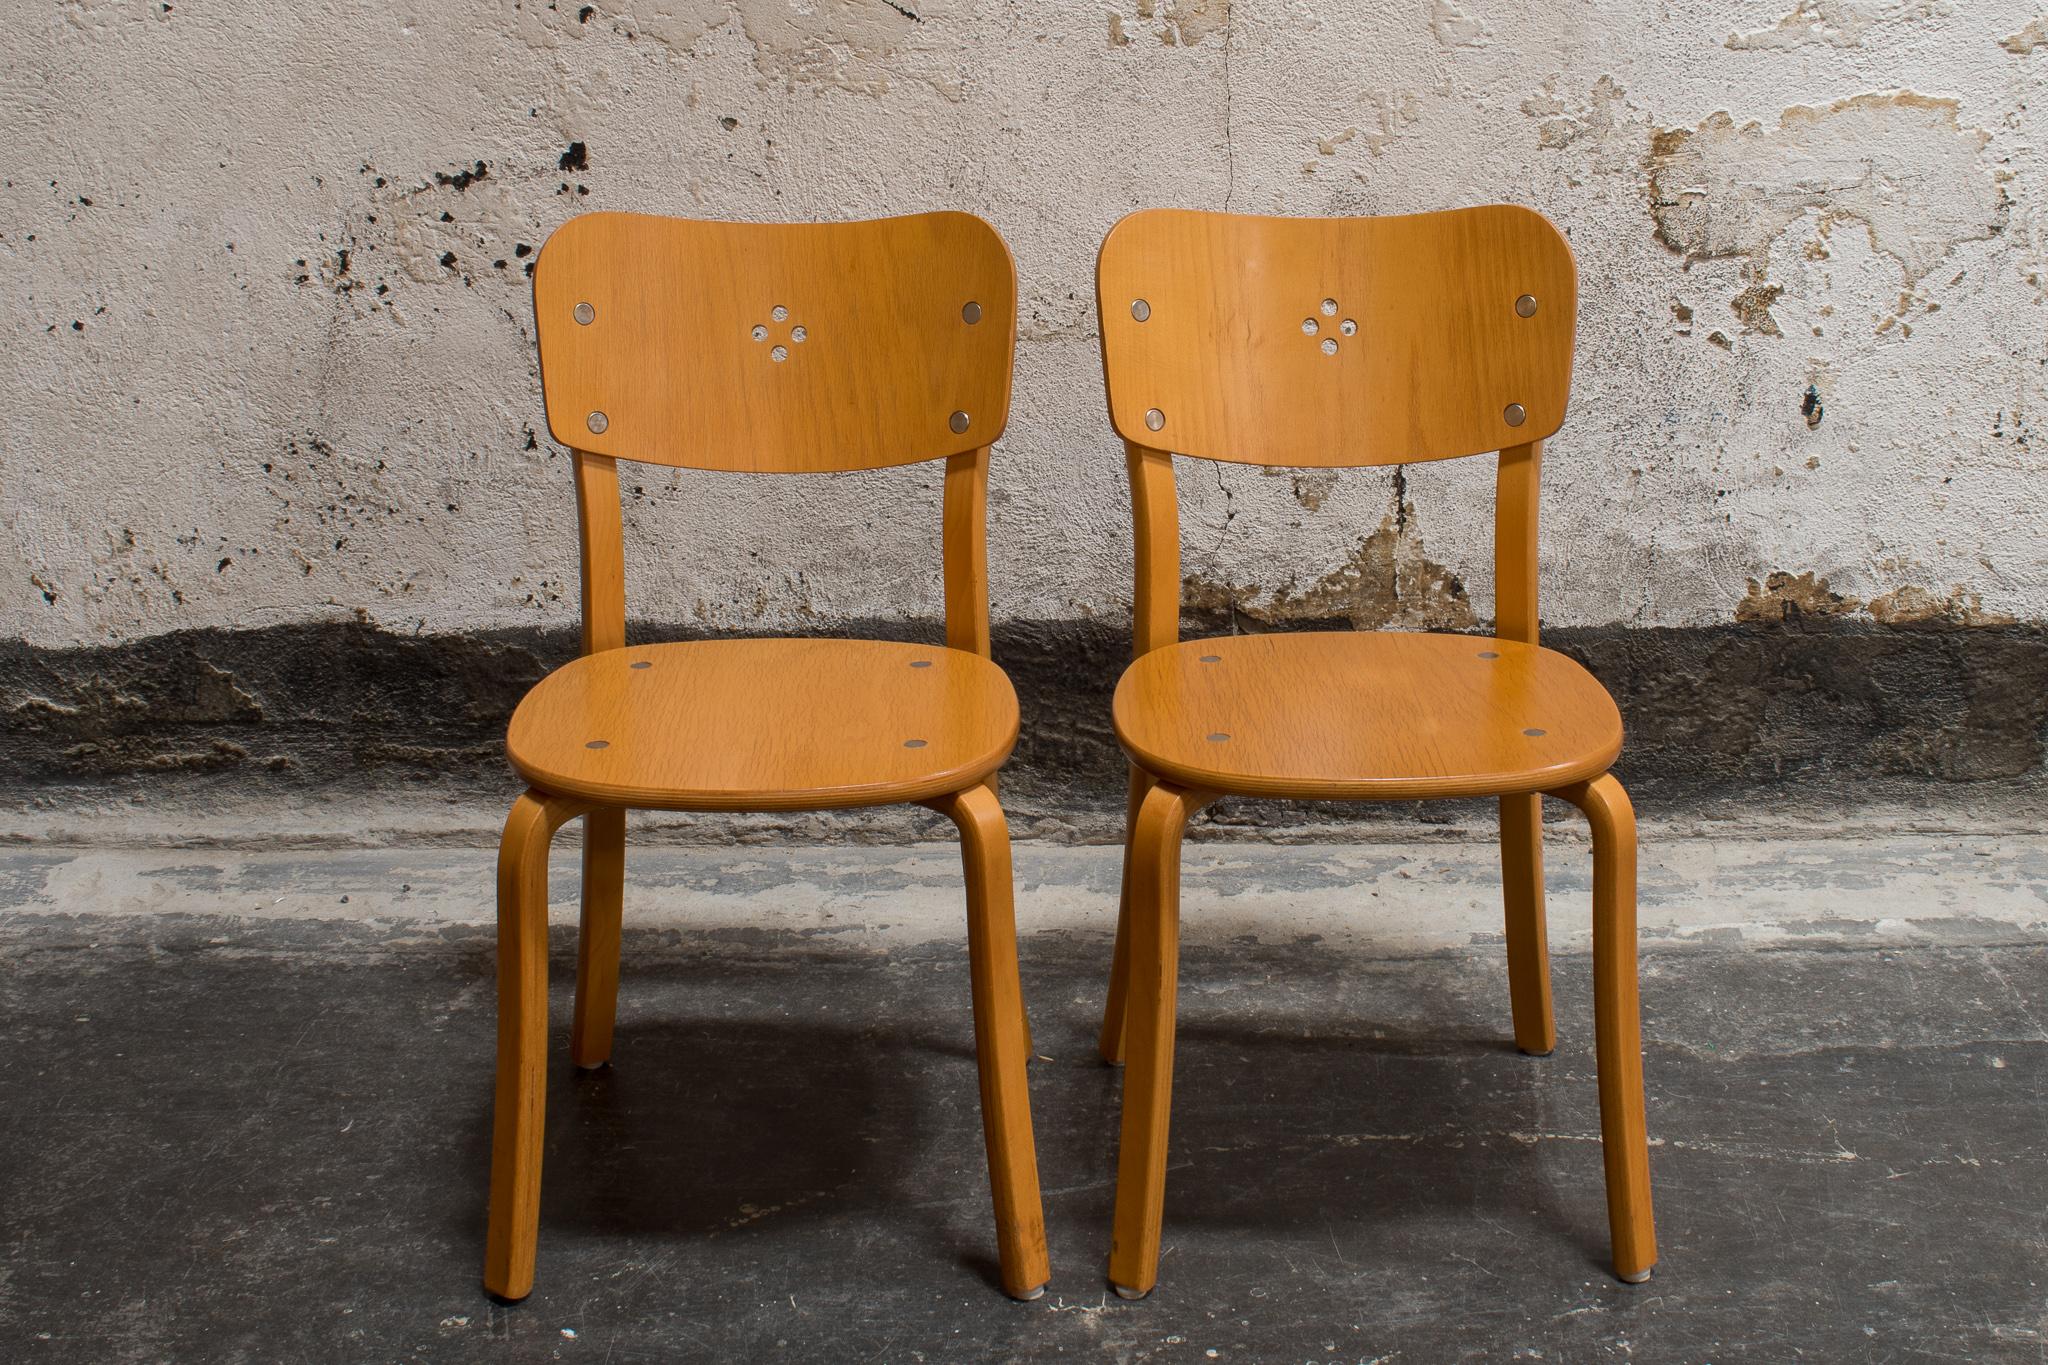 Lovely pair of Swedish side or dining chairs in the style of Alvar Aalto.
Another pair, with different grain direction, available to purchase to create a set of 4.

SD 15.5, SH 17.75, H 31, W 16.5, D 19.5.